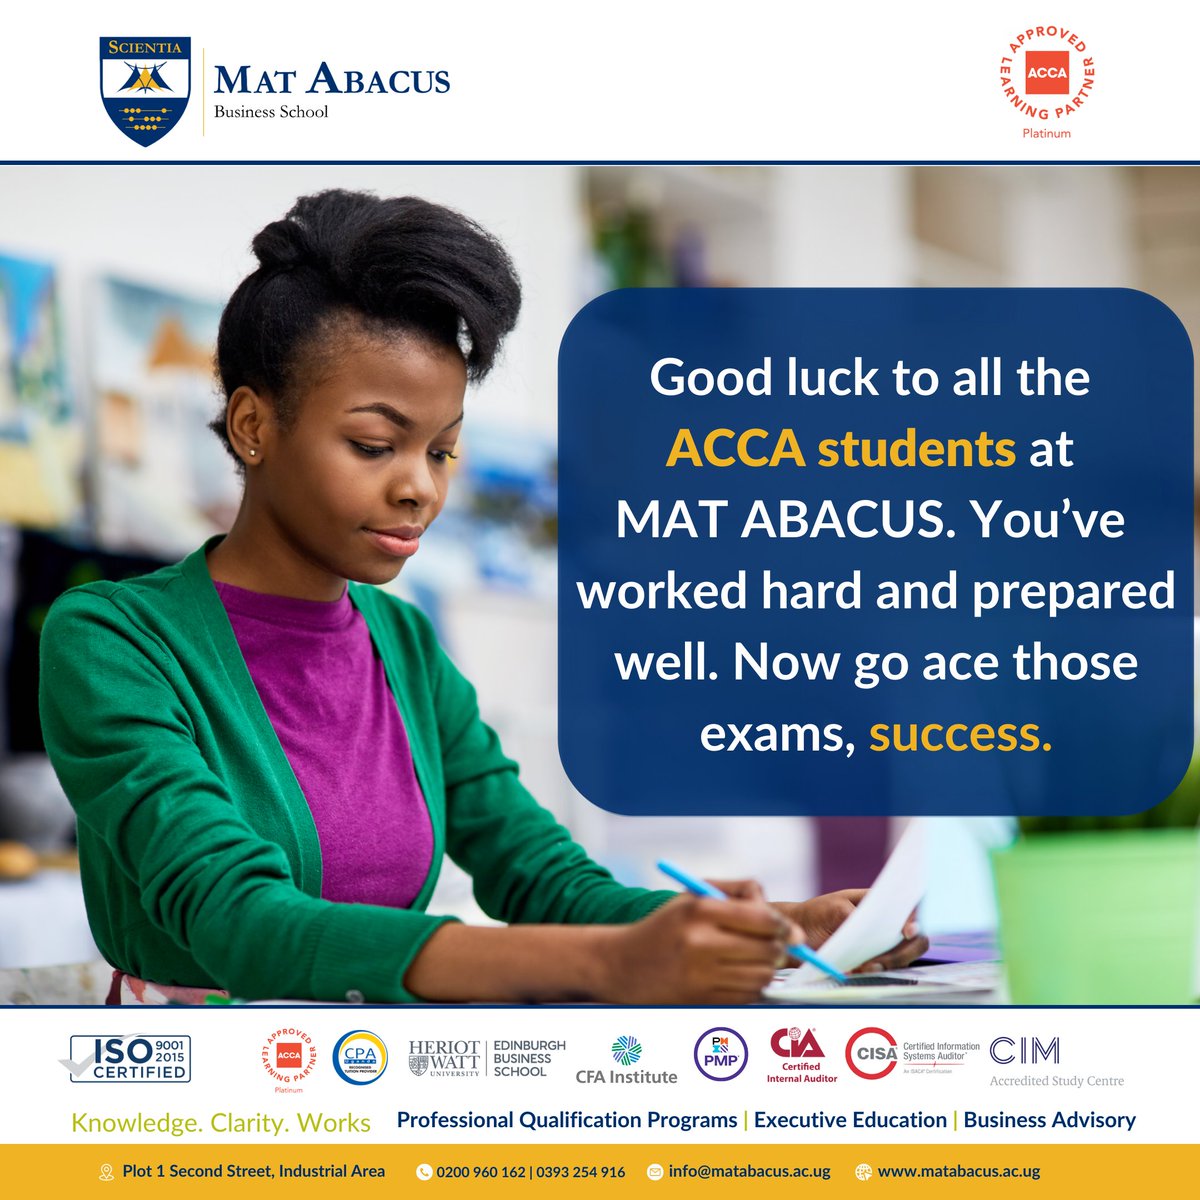 Wishing ACCA candidates at MAT ABACUS a journey filled with success in your exams! May each question be an opportunity to showcase your expertise. You've prepared diligently, and now it's time to shine. #matabacus #acca